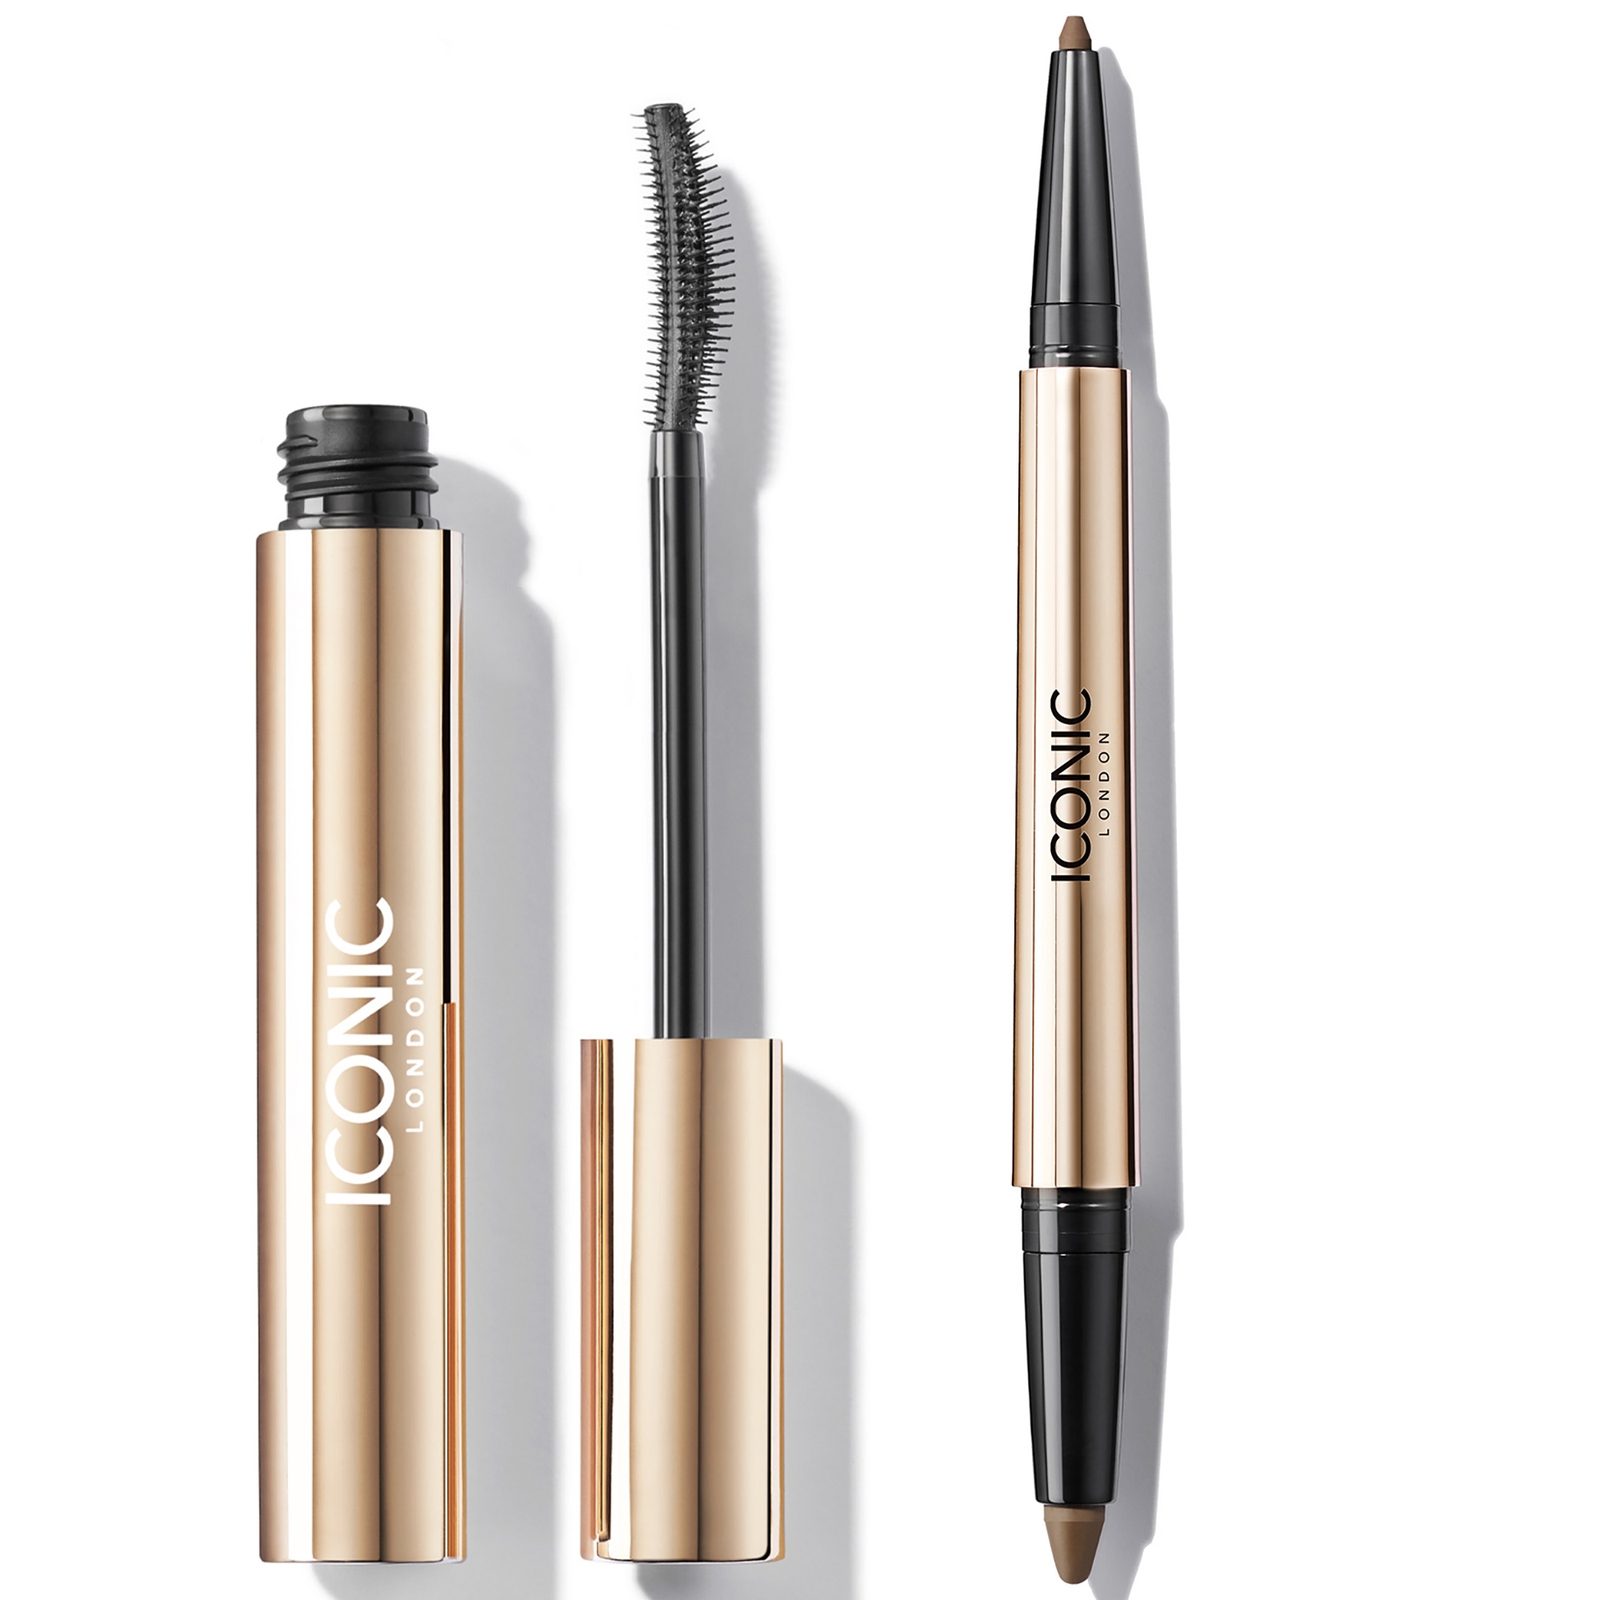 ICONIC London Enrich and Elevate Mascara and Kajal Eyeliner Bundle (Various Shades) - Chocolate Brow